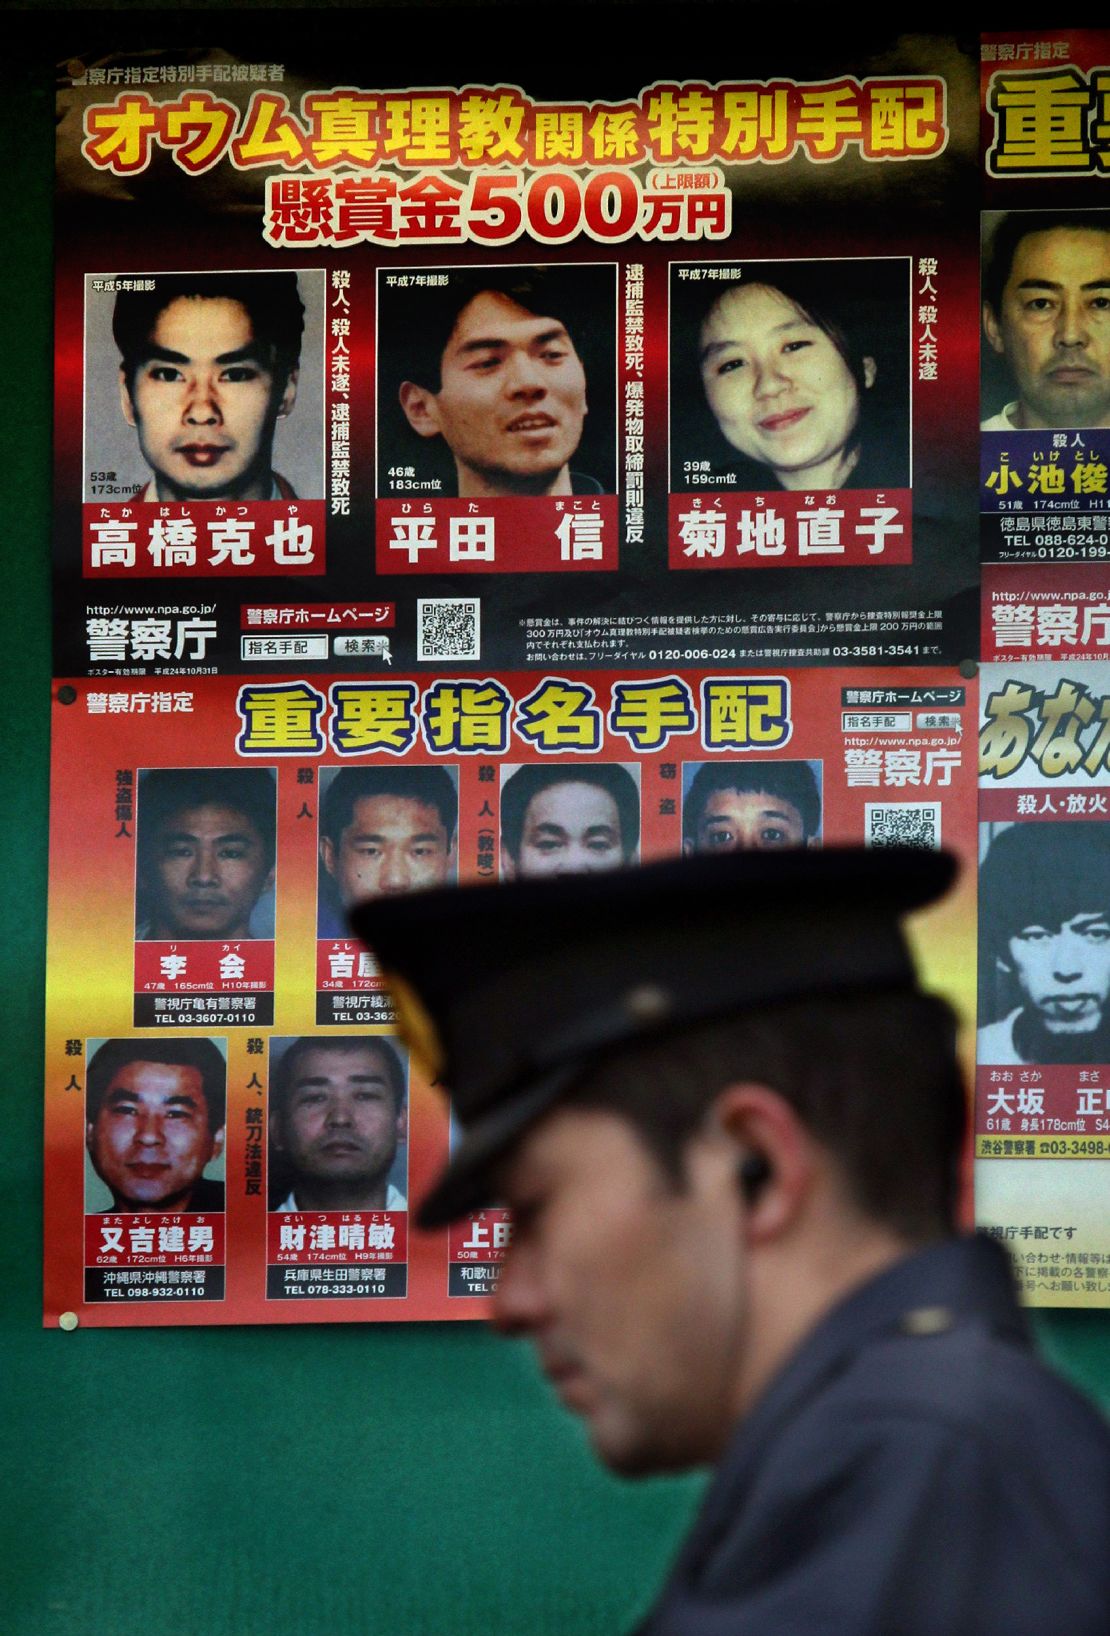 A policeman passes before pictures of suspected former members of Japan's Aum Supreme Truth doomsday cult, including Makoto Hirata who was arrested in Tokyo on January 1, 2012 after almost 17 years on the run.